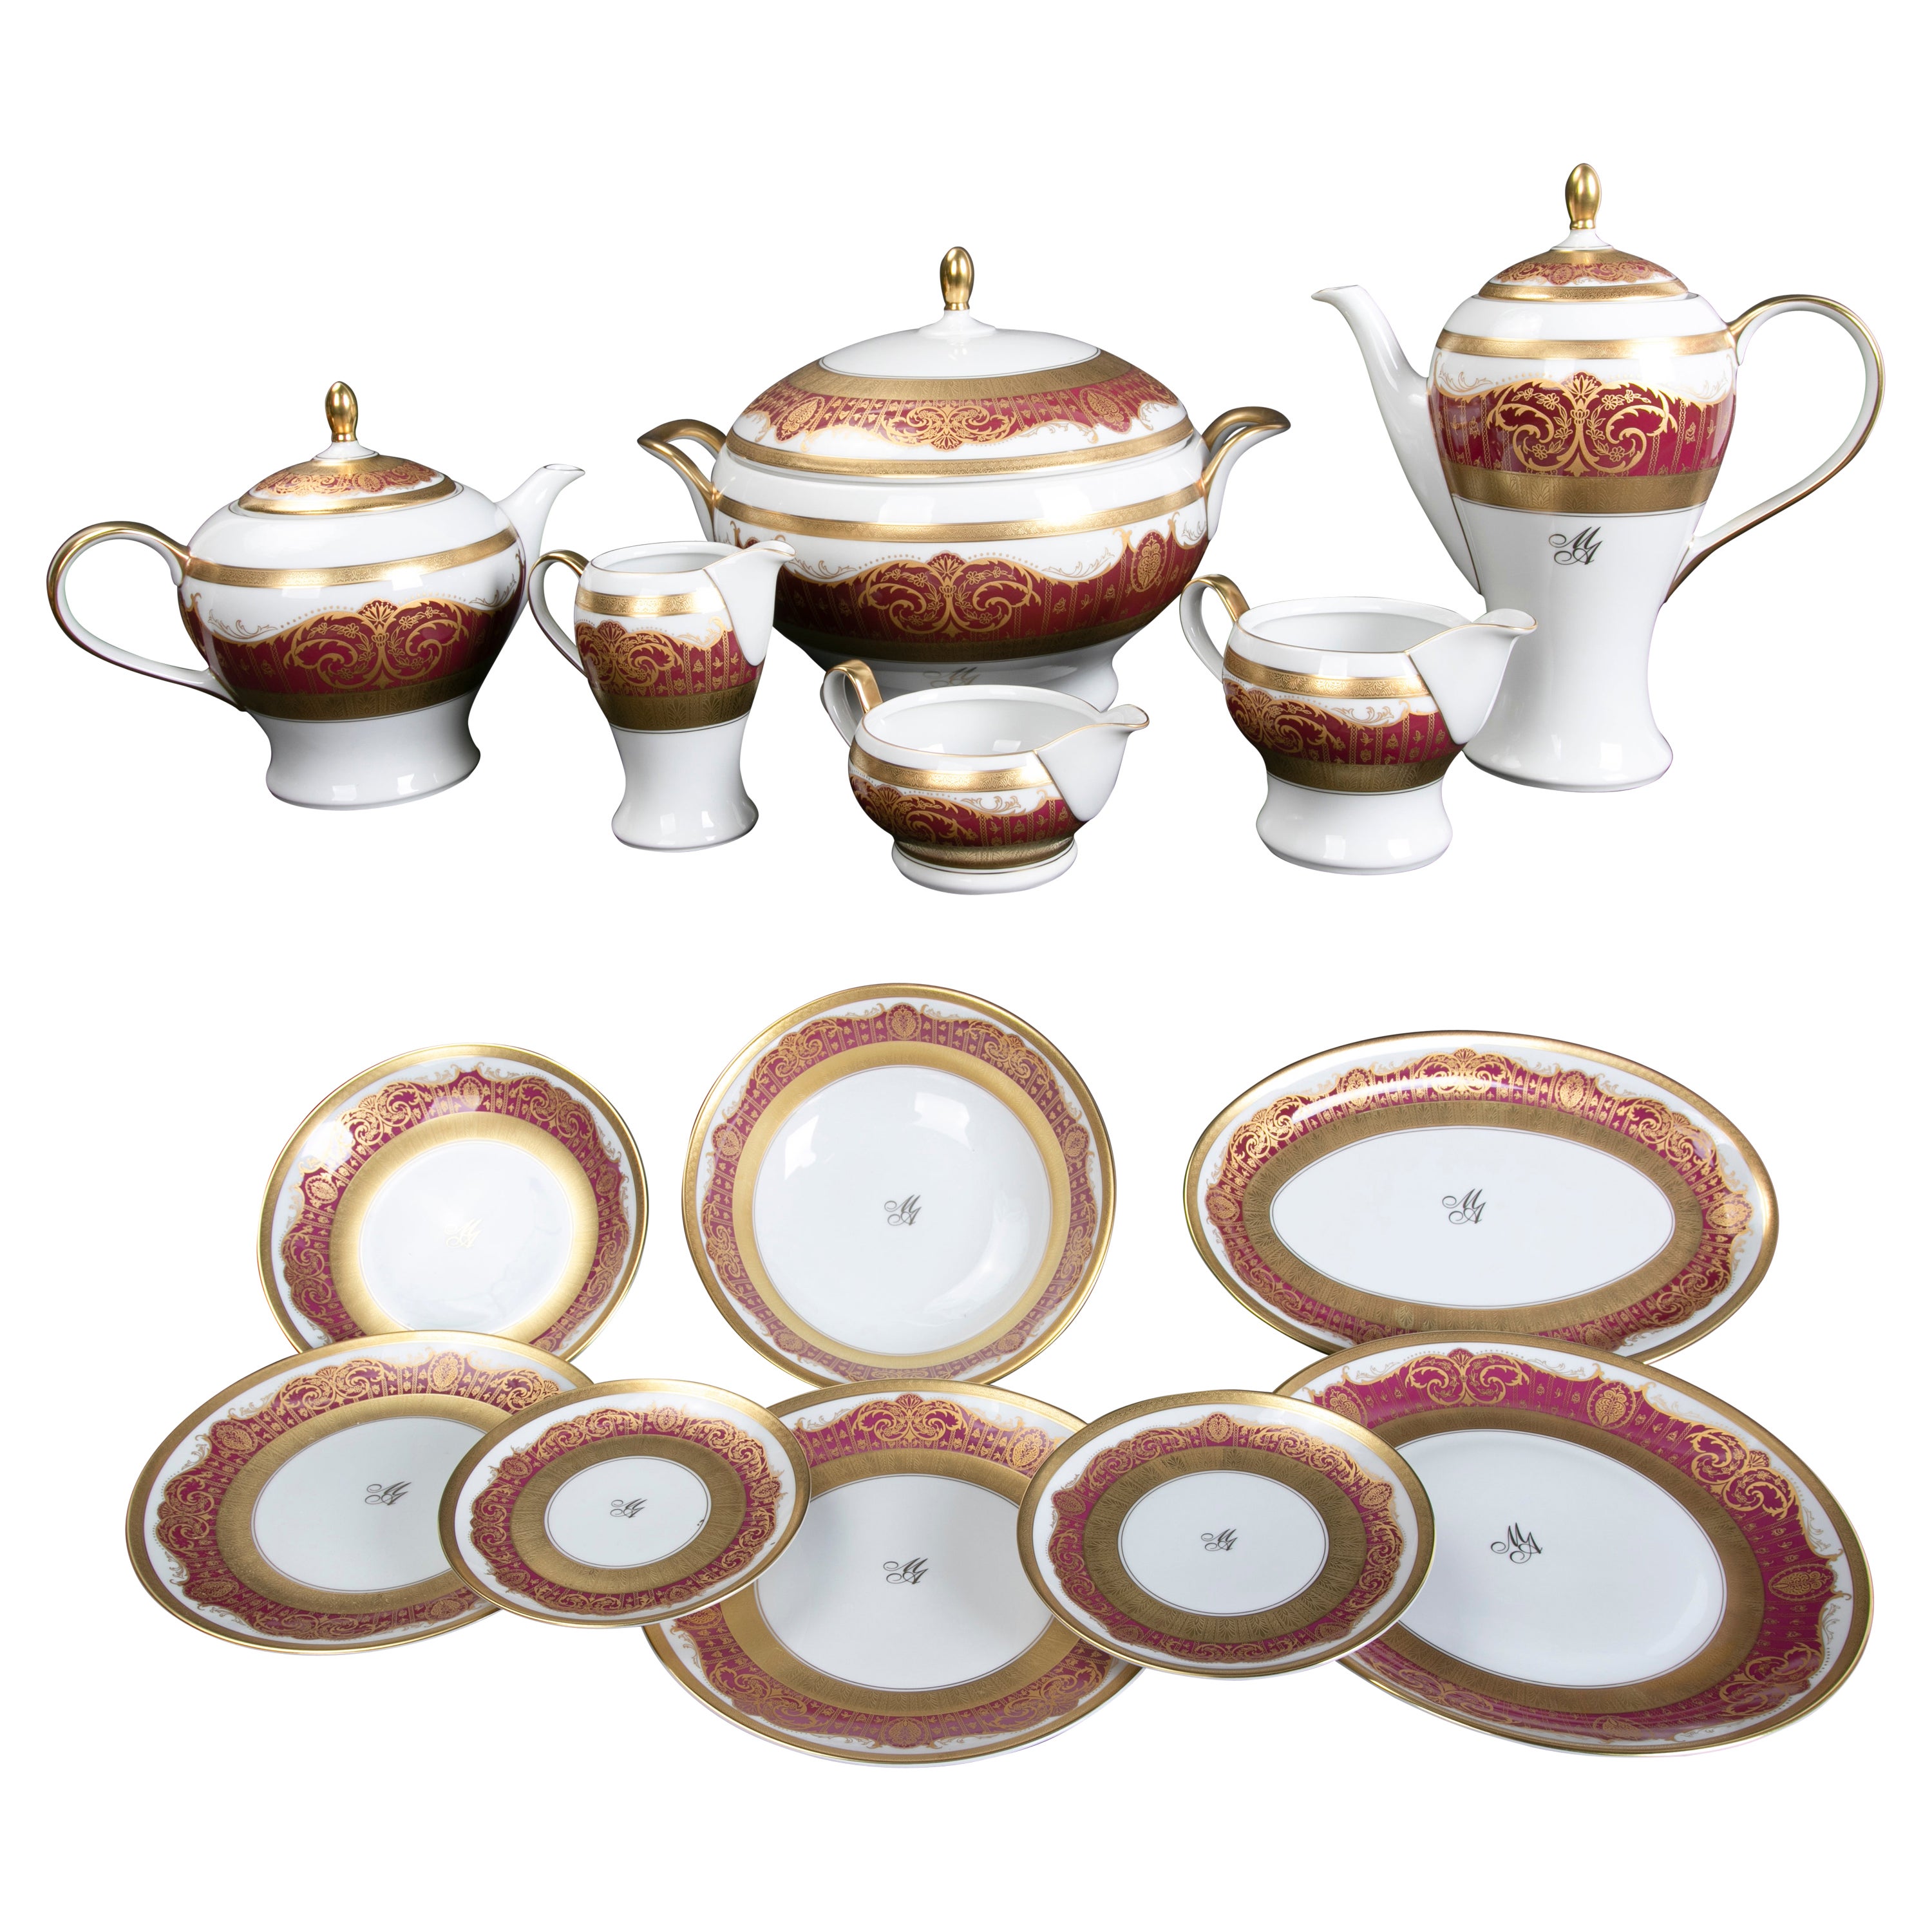 Complete Karlovarsky Porcelain Tableware '229 Pieces' Decorated with Gold